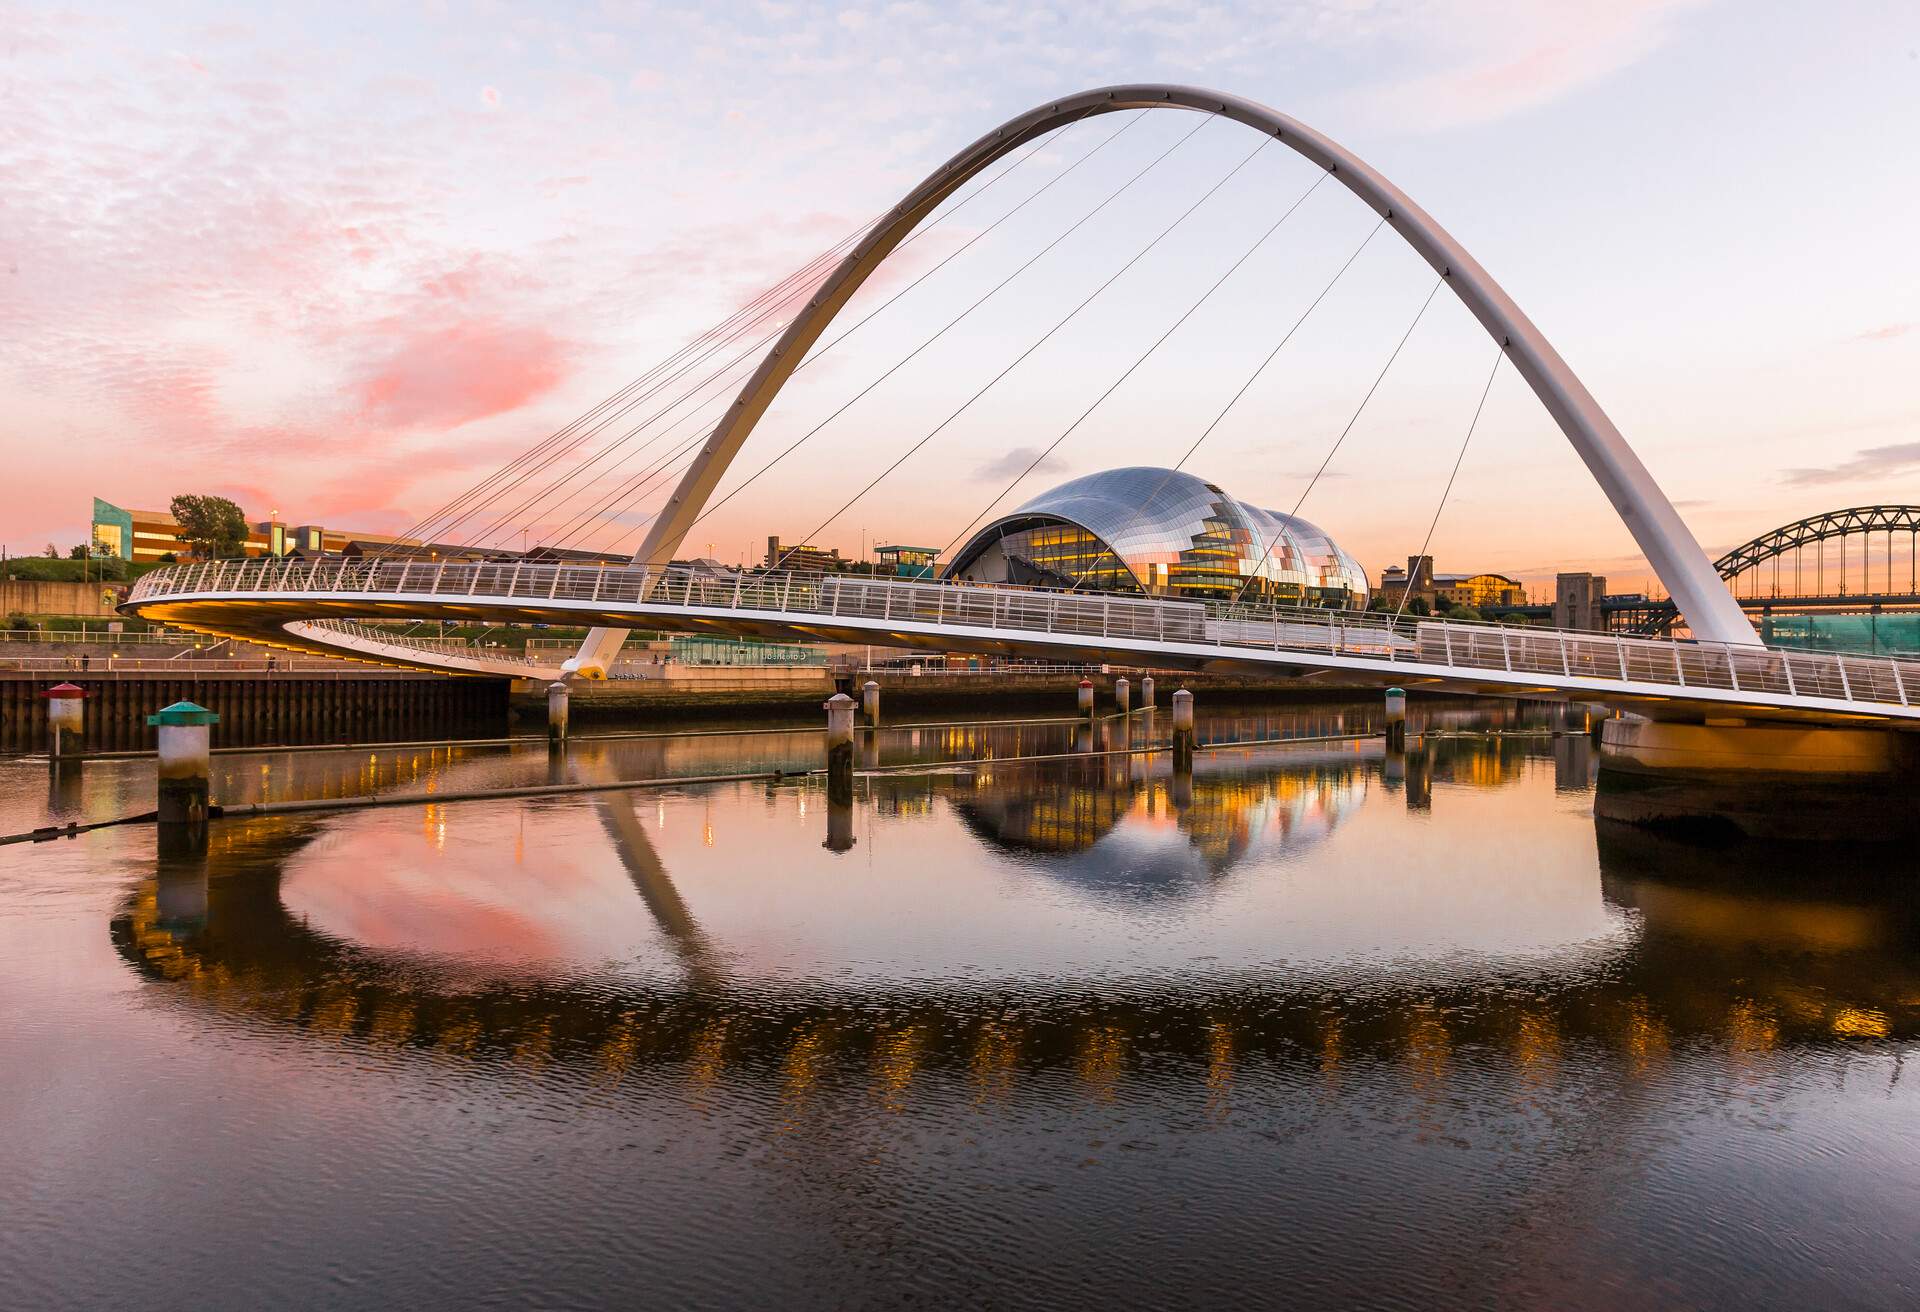 The Gateshead Millennium Bridge (Keith Brownlie, Wilkinson Eyre Architects) between Gateshead and Newcastle upon Tyne and the River Tyne at the sunset, the Sage Gateshead (Norman Foster architect) on the background